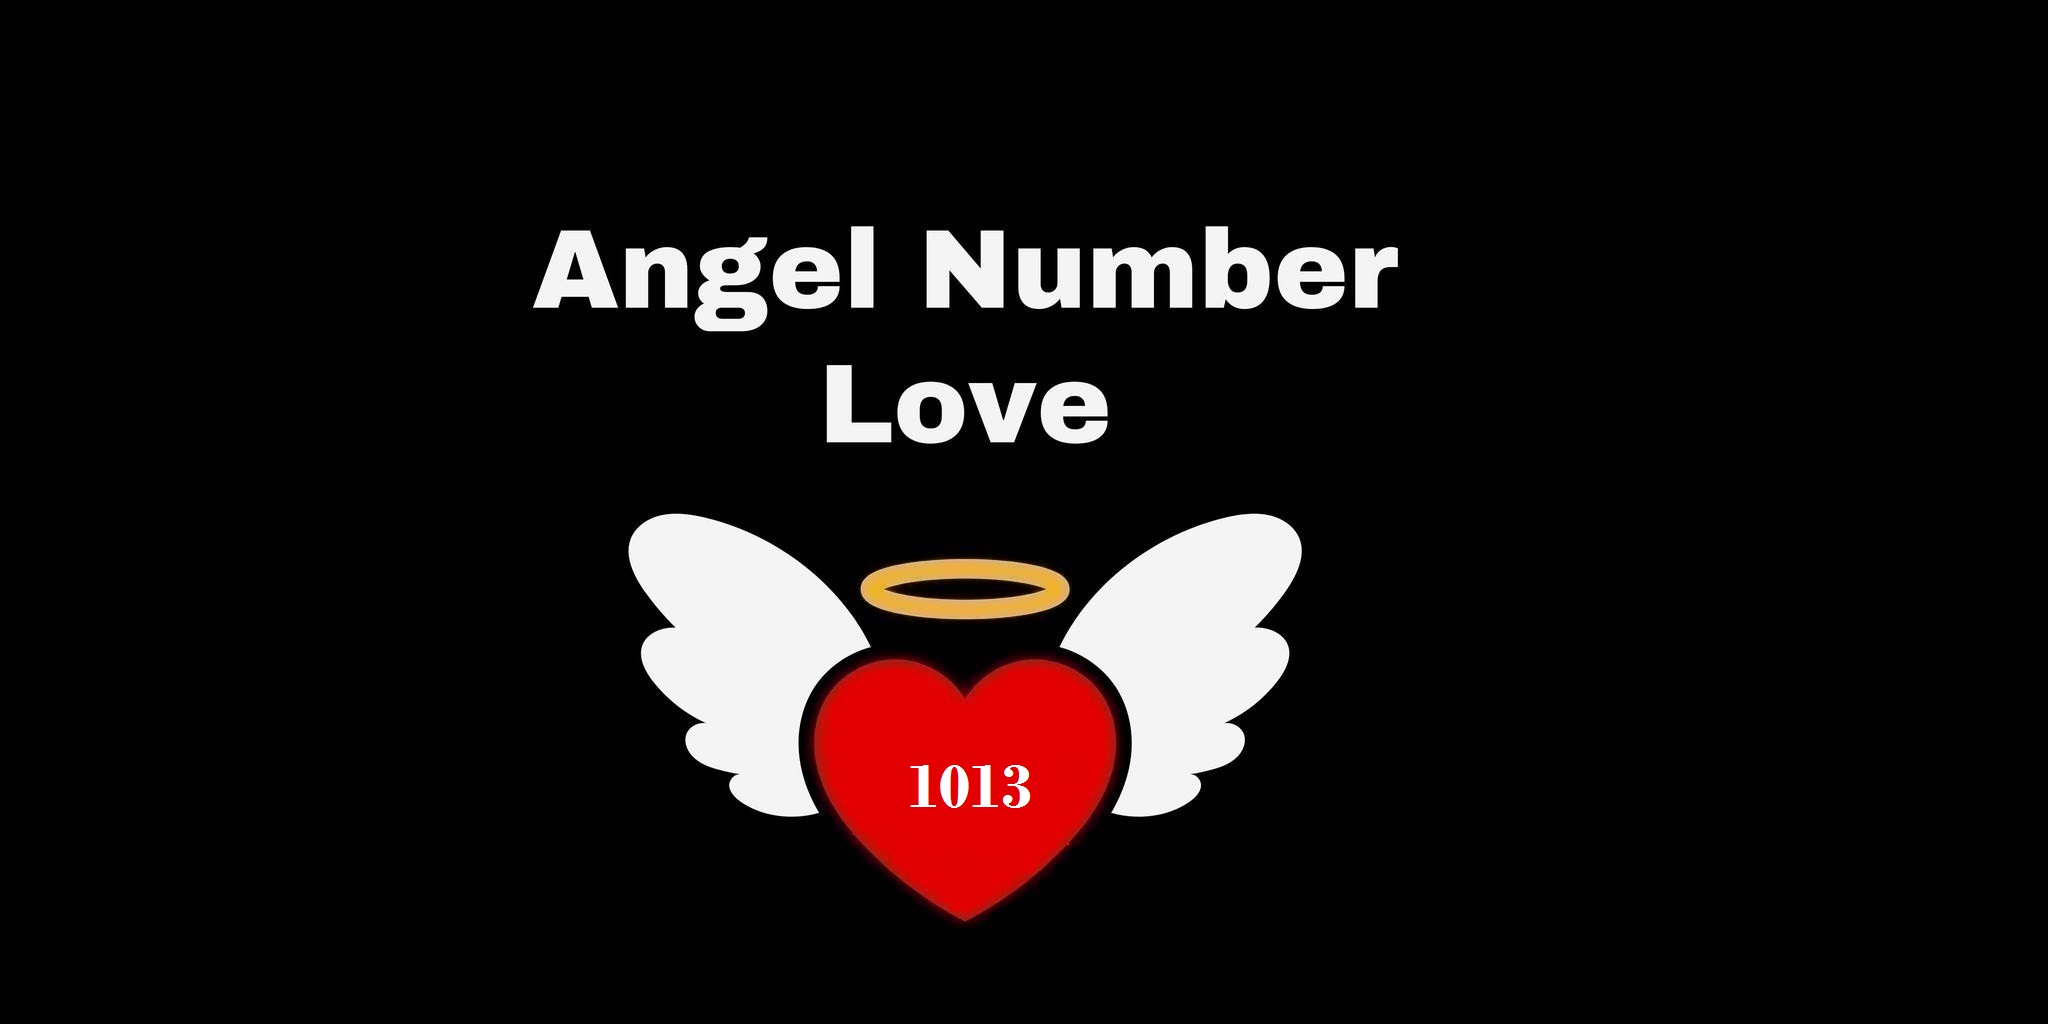 1013 Angel Number Meaning In Love